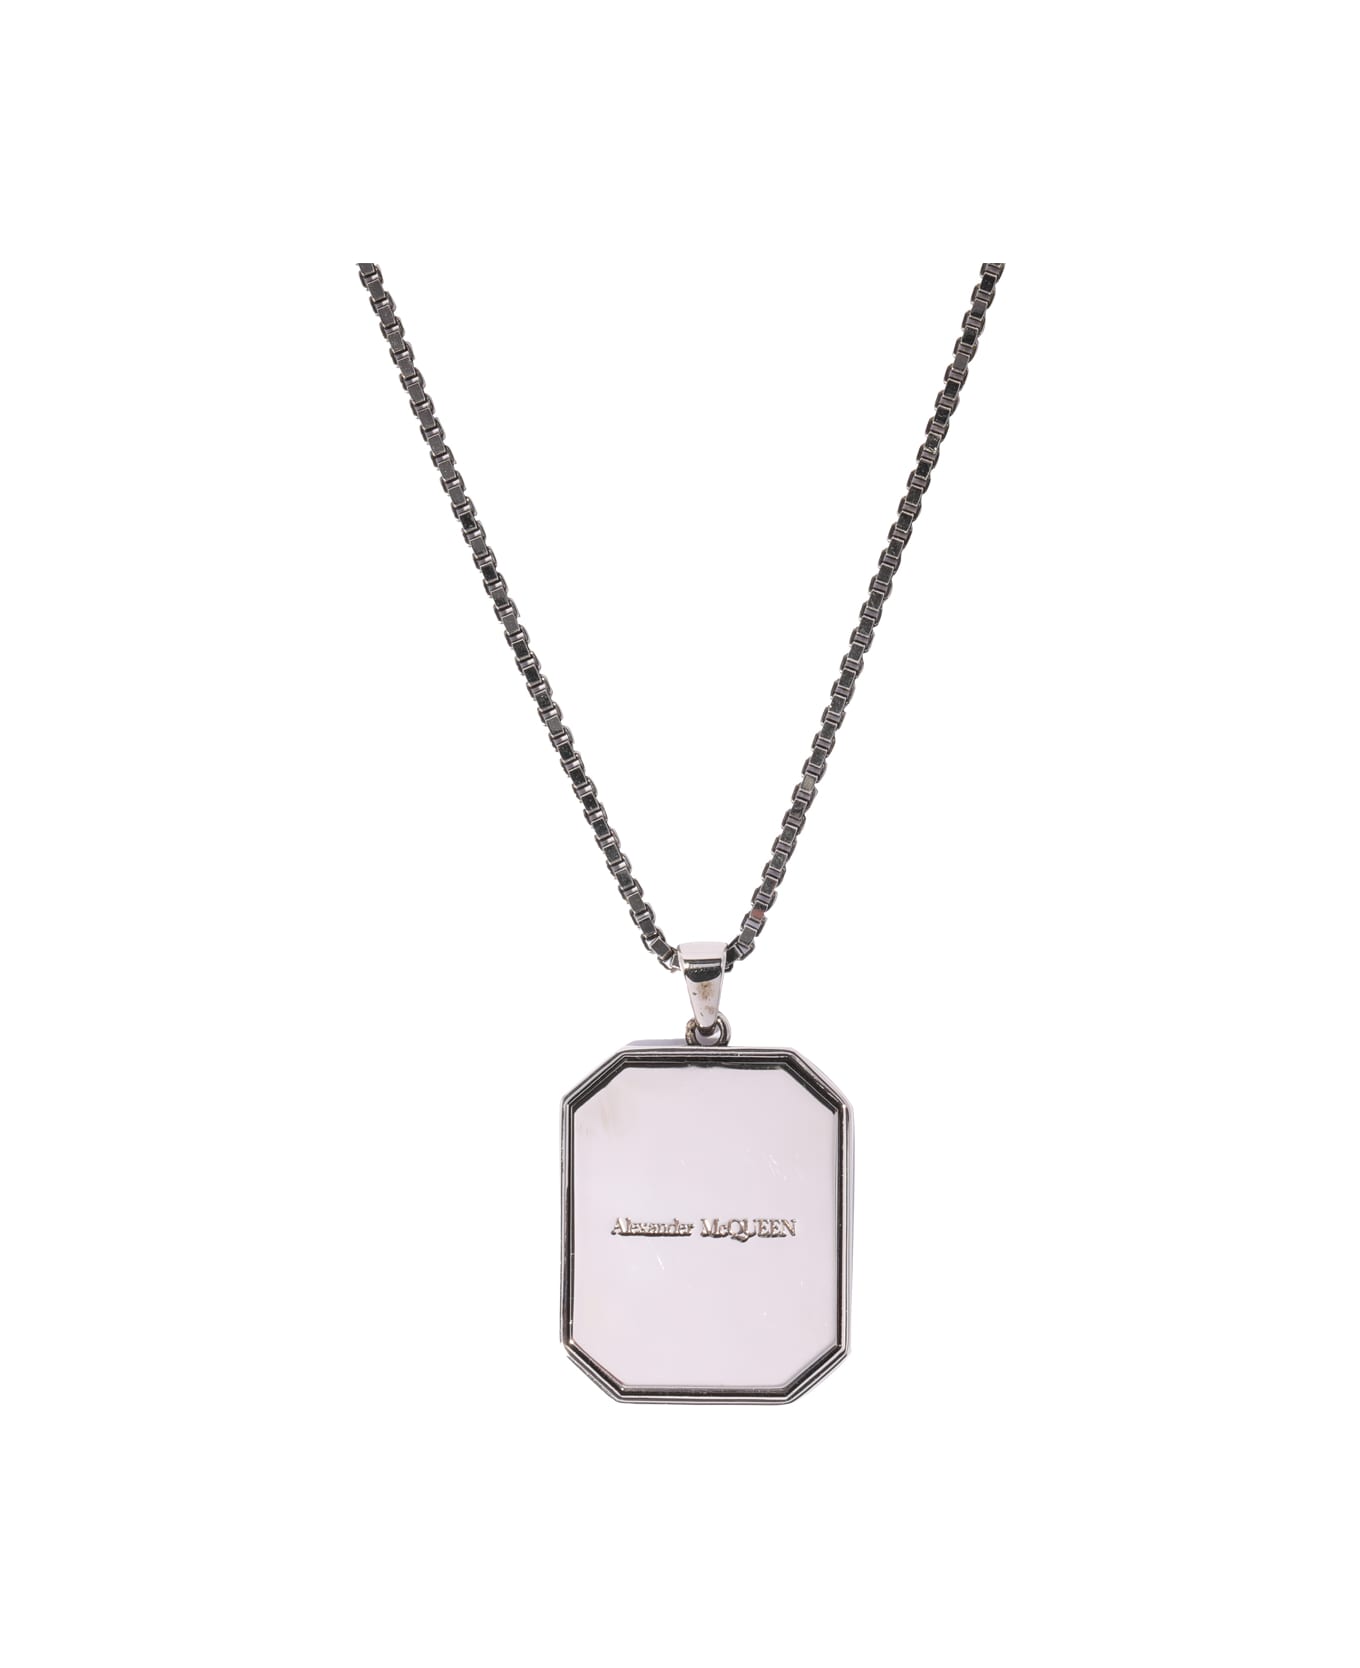 Alexander McQueen Plate Medallion Necklace - Silver ネックレス